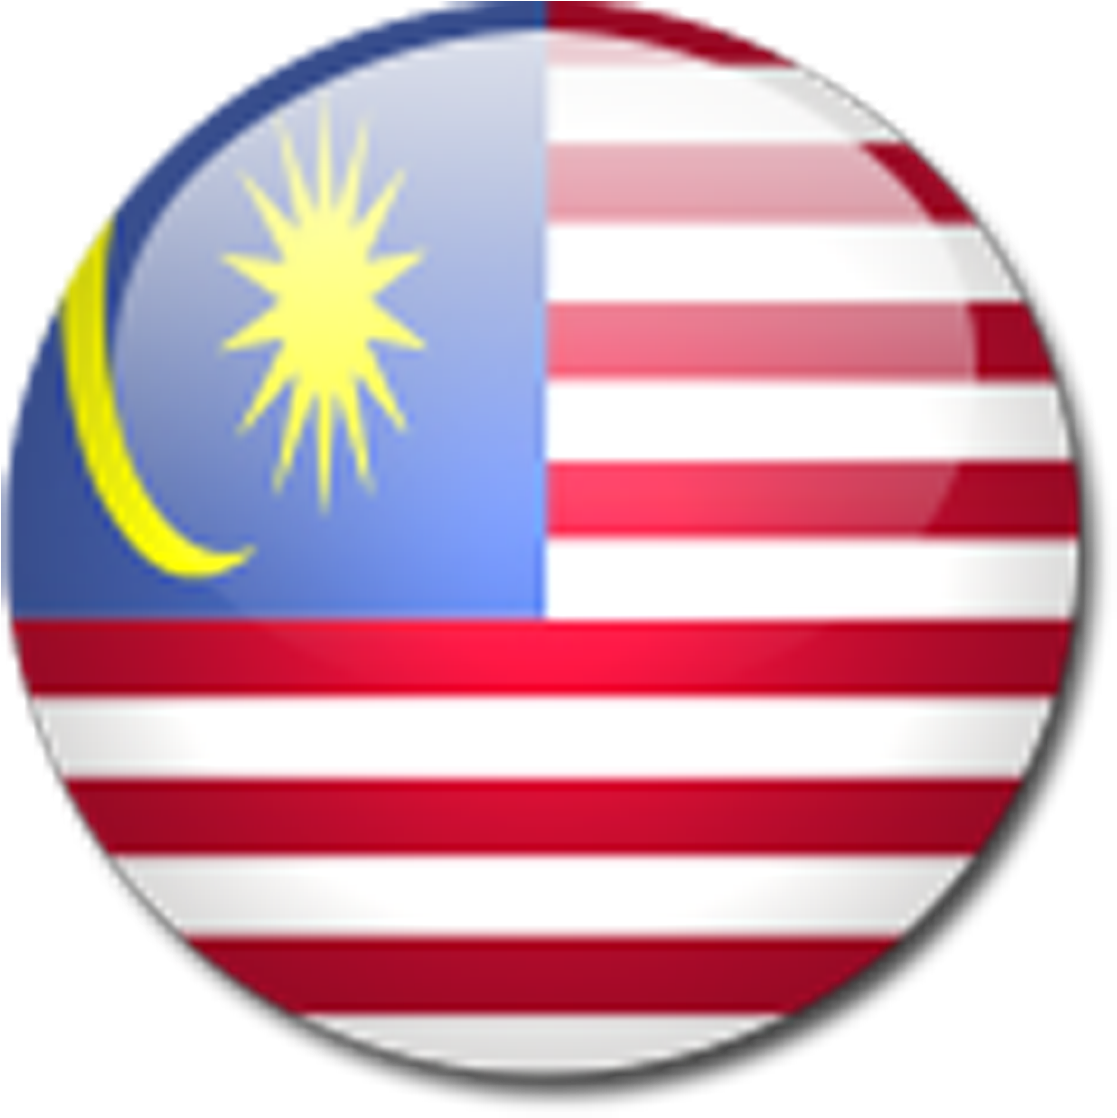 A Flag Button With A Yellow Star And A Crescent Moon